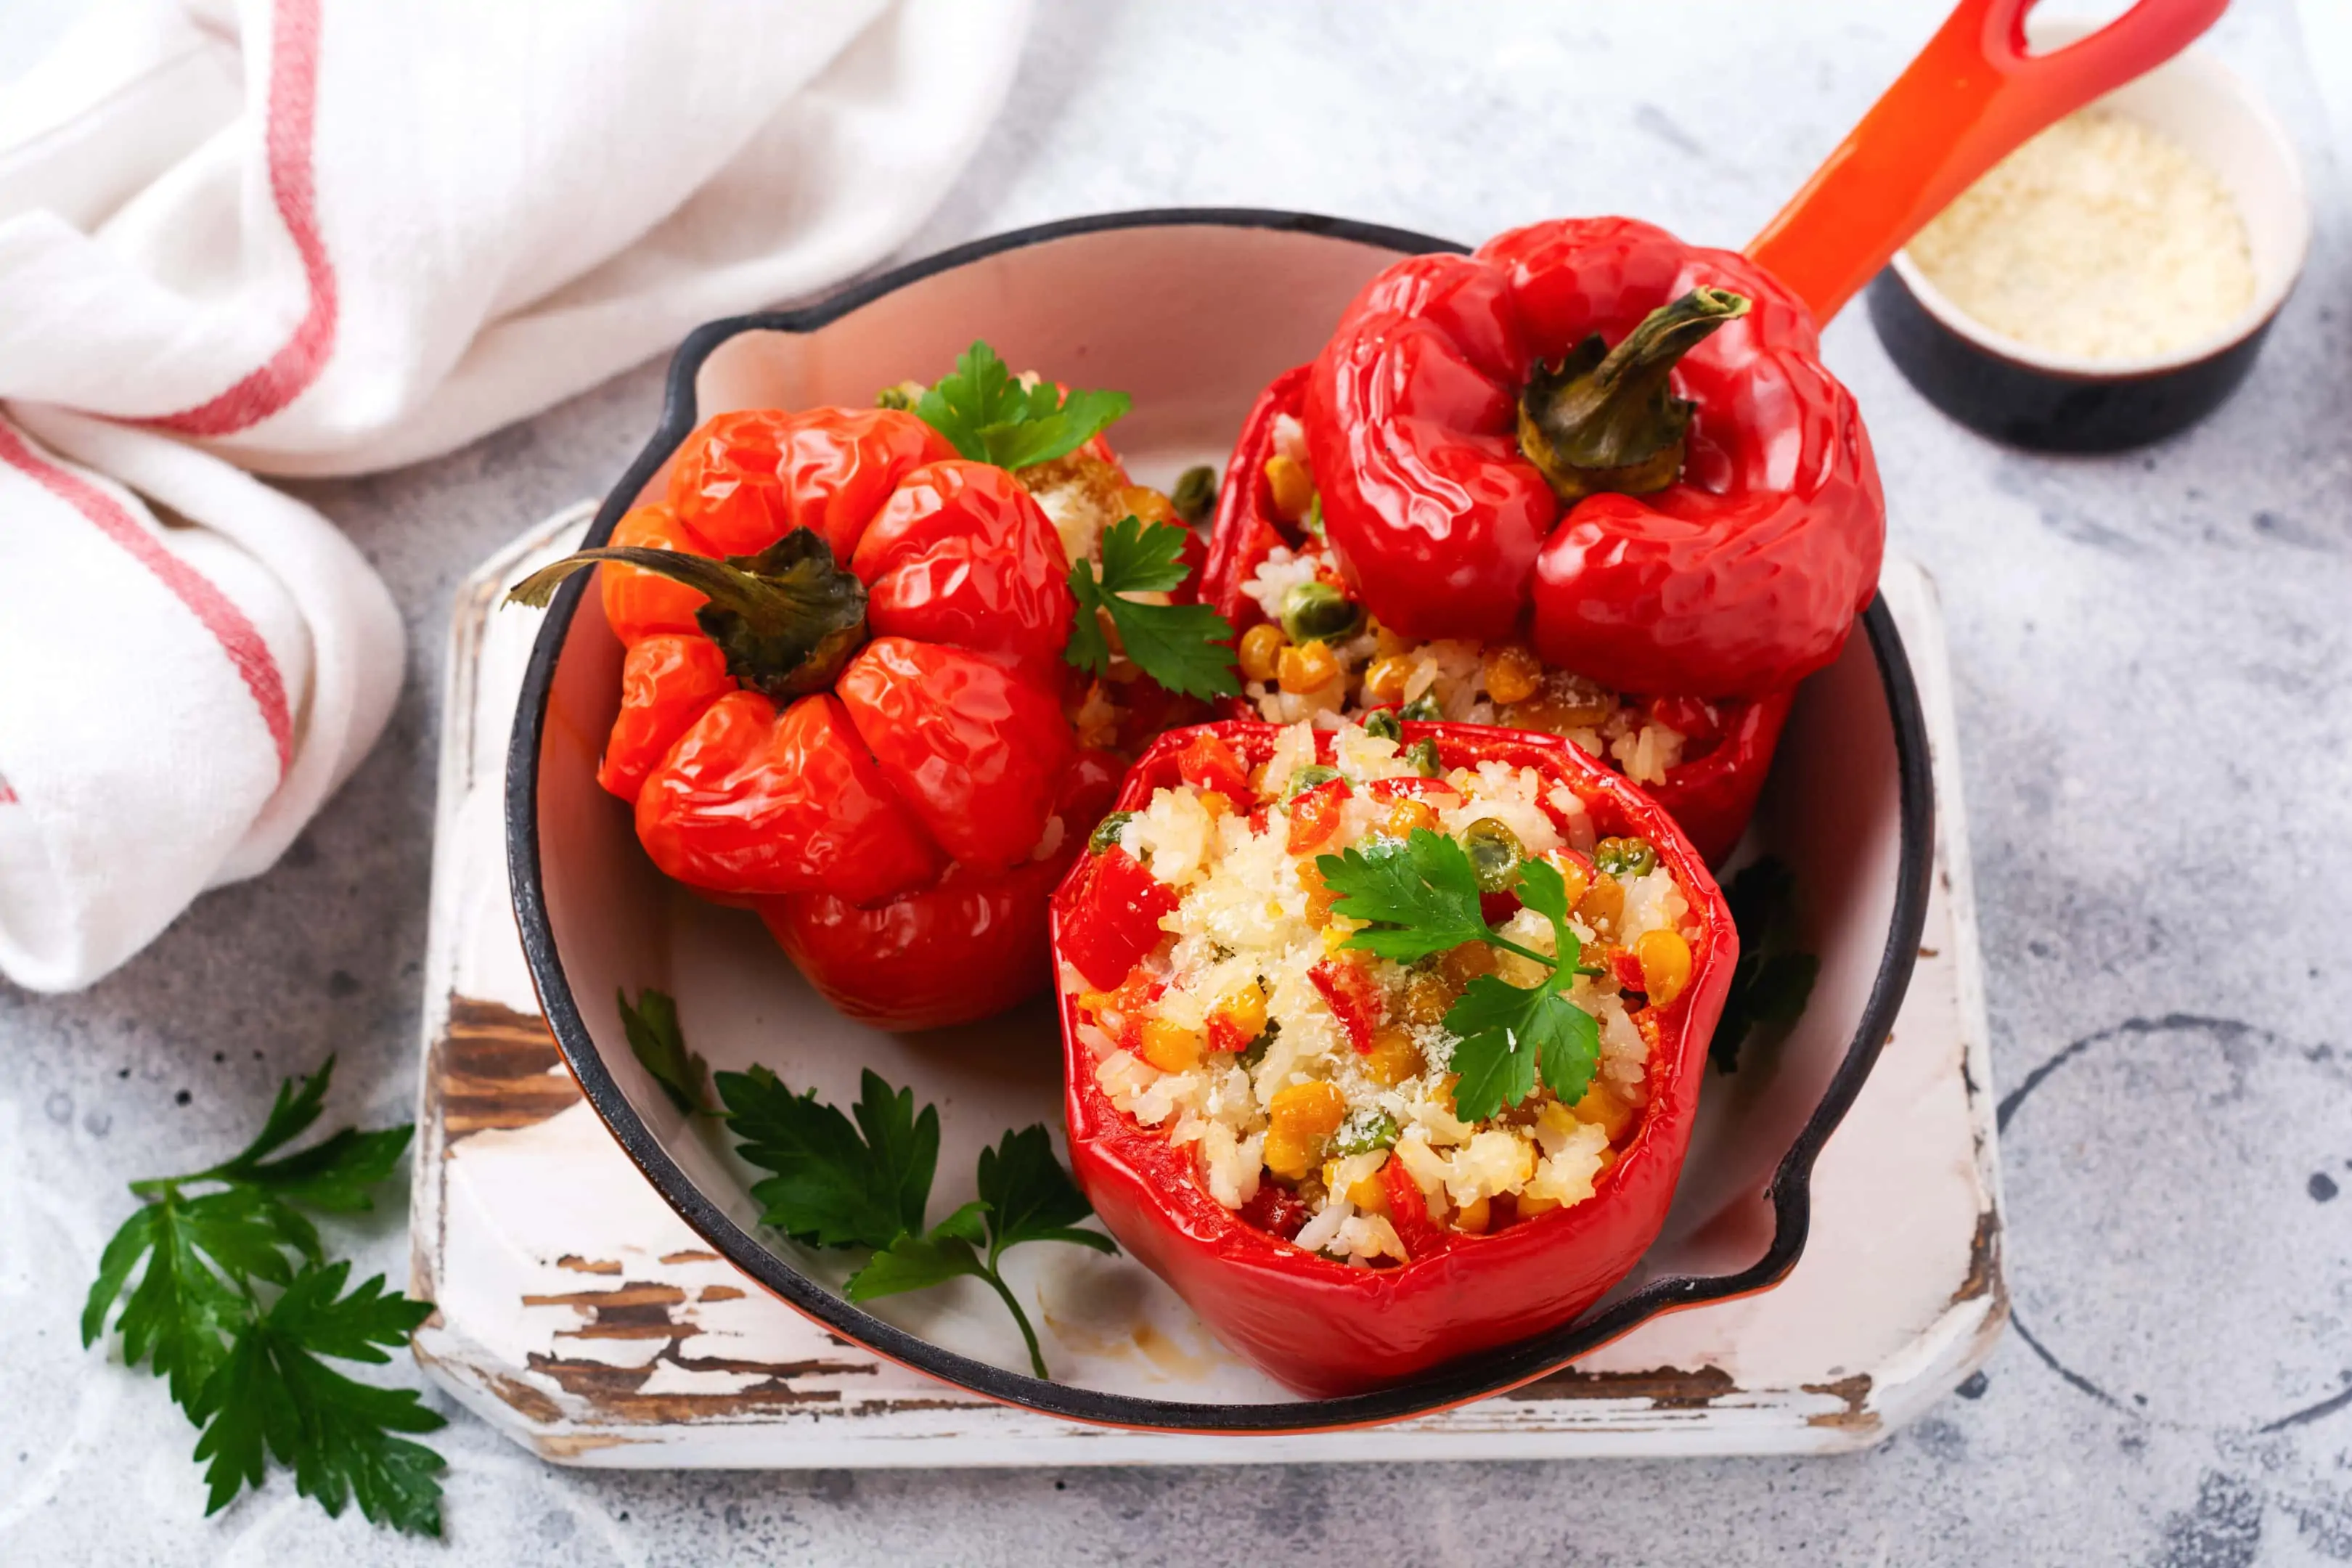 Red bell peppers stuffed with rice and vegetables on cast iron pan